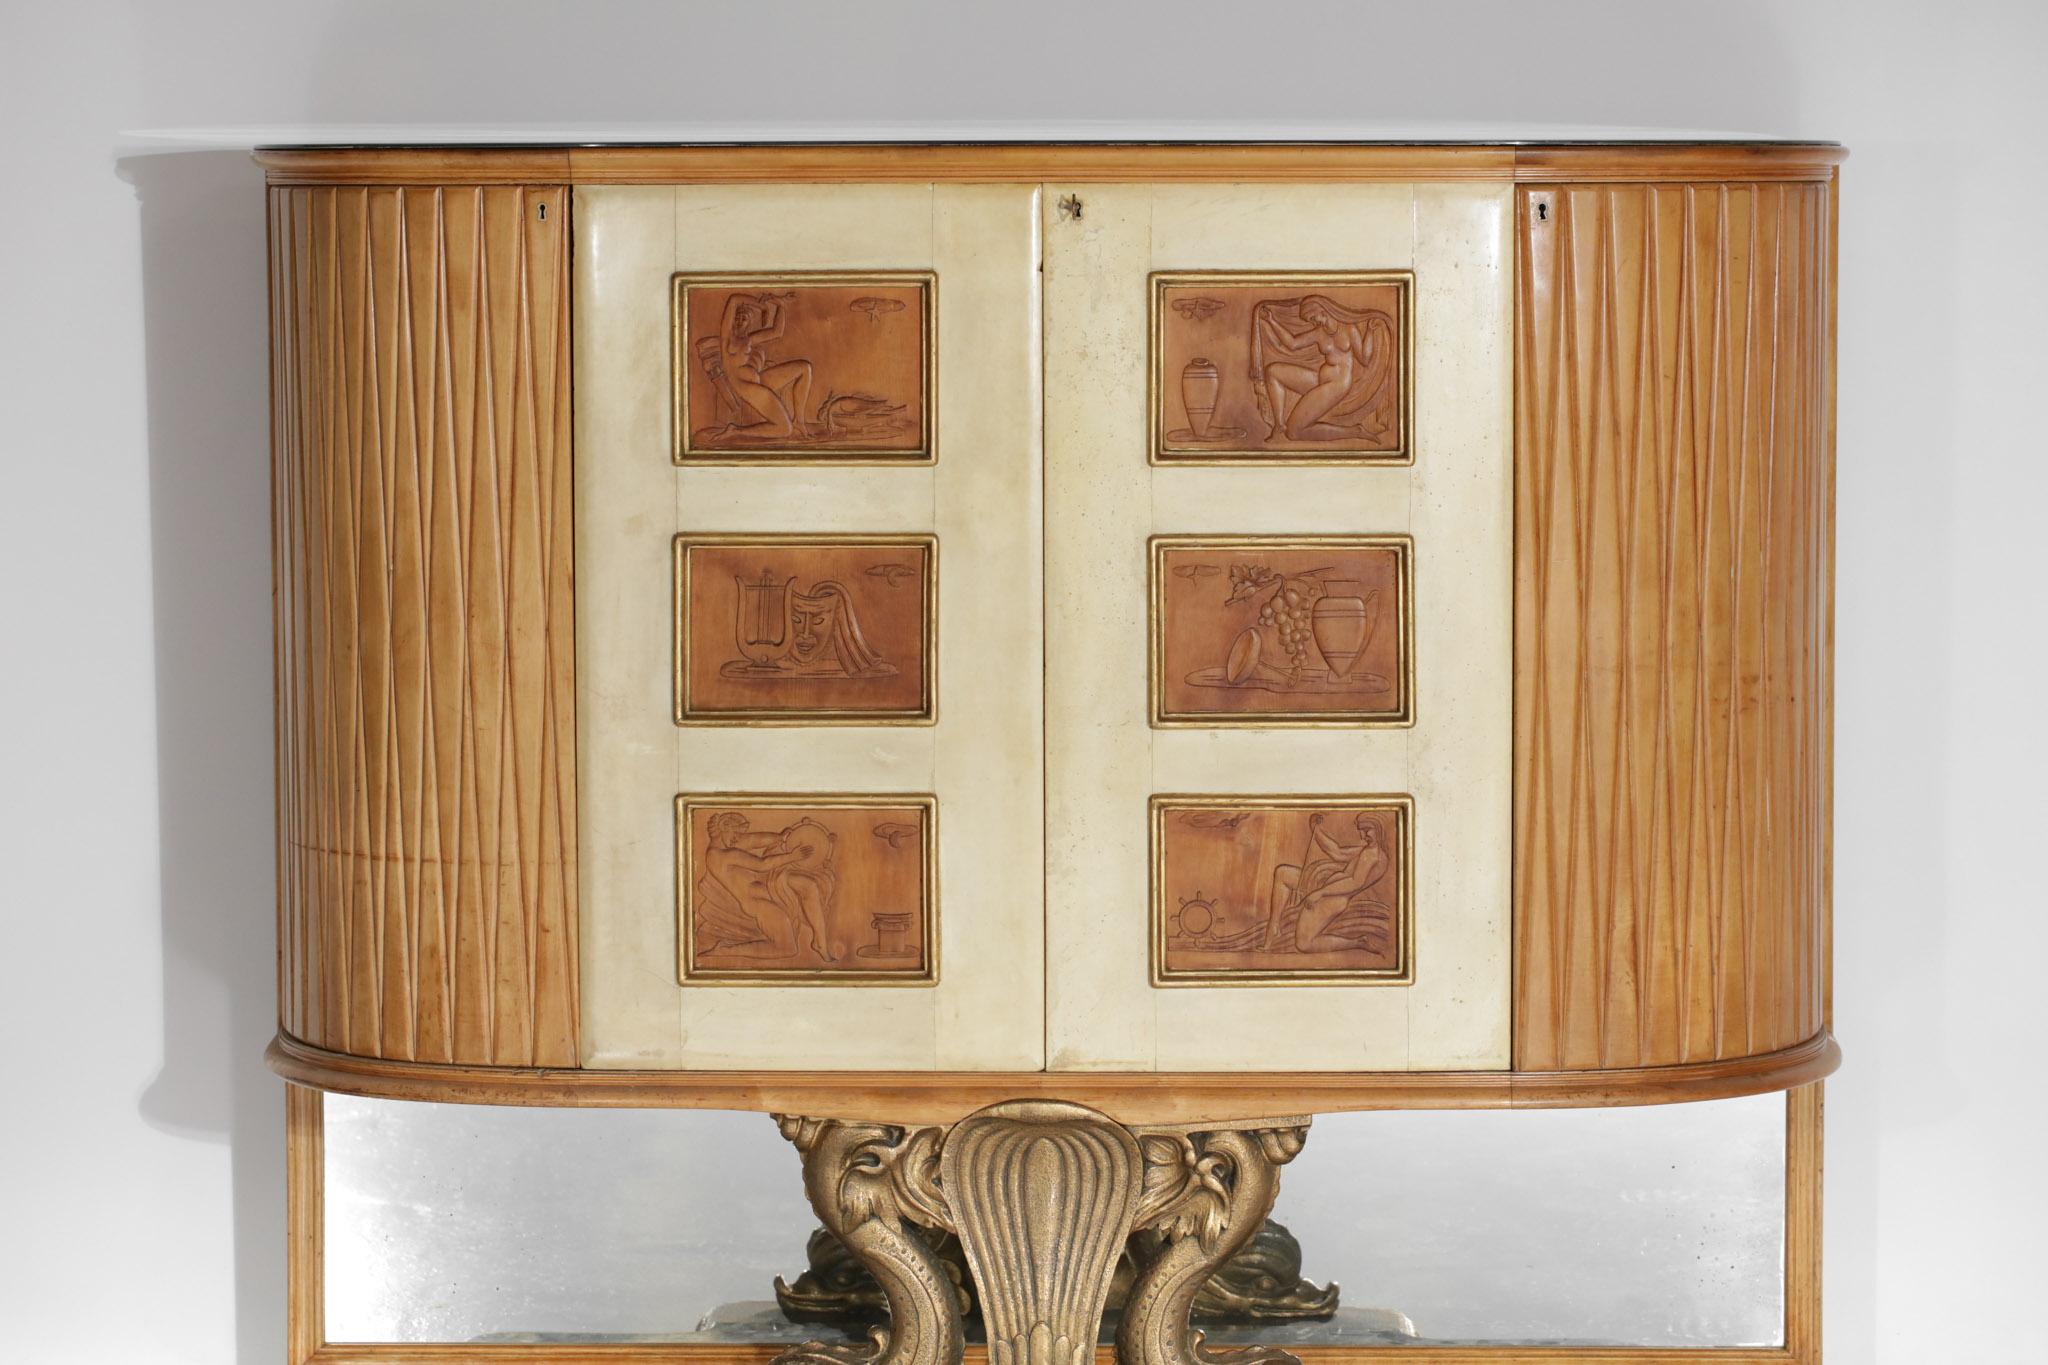 Baroque Revival Large Italian Bar Furniture by Osvaldo Borsani in Wood and Parchment 1940, E379